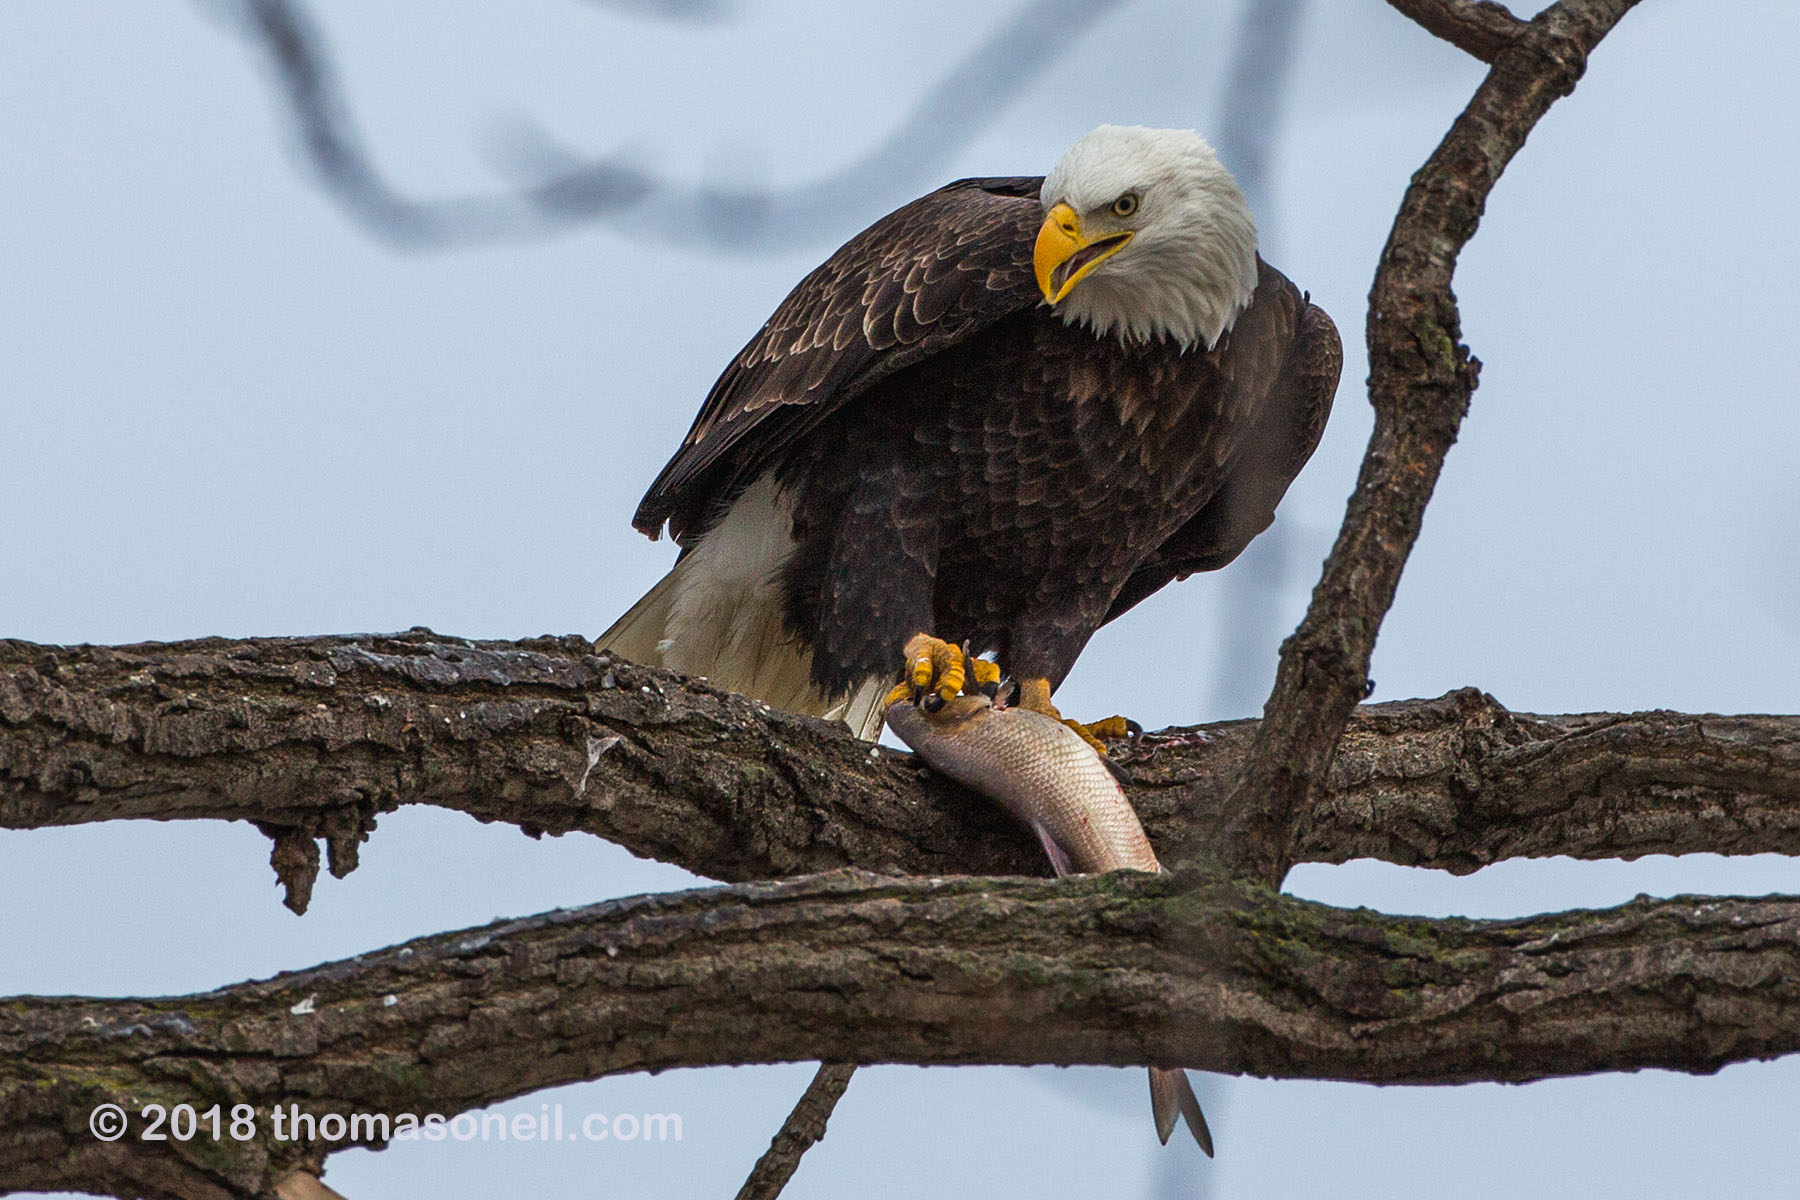 Bald eagle finds a spot to enjoy dinner, 1 of 7 in sequence, Keokuk, Iowa, January 2018.  Click for next photo.